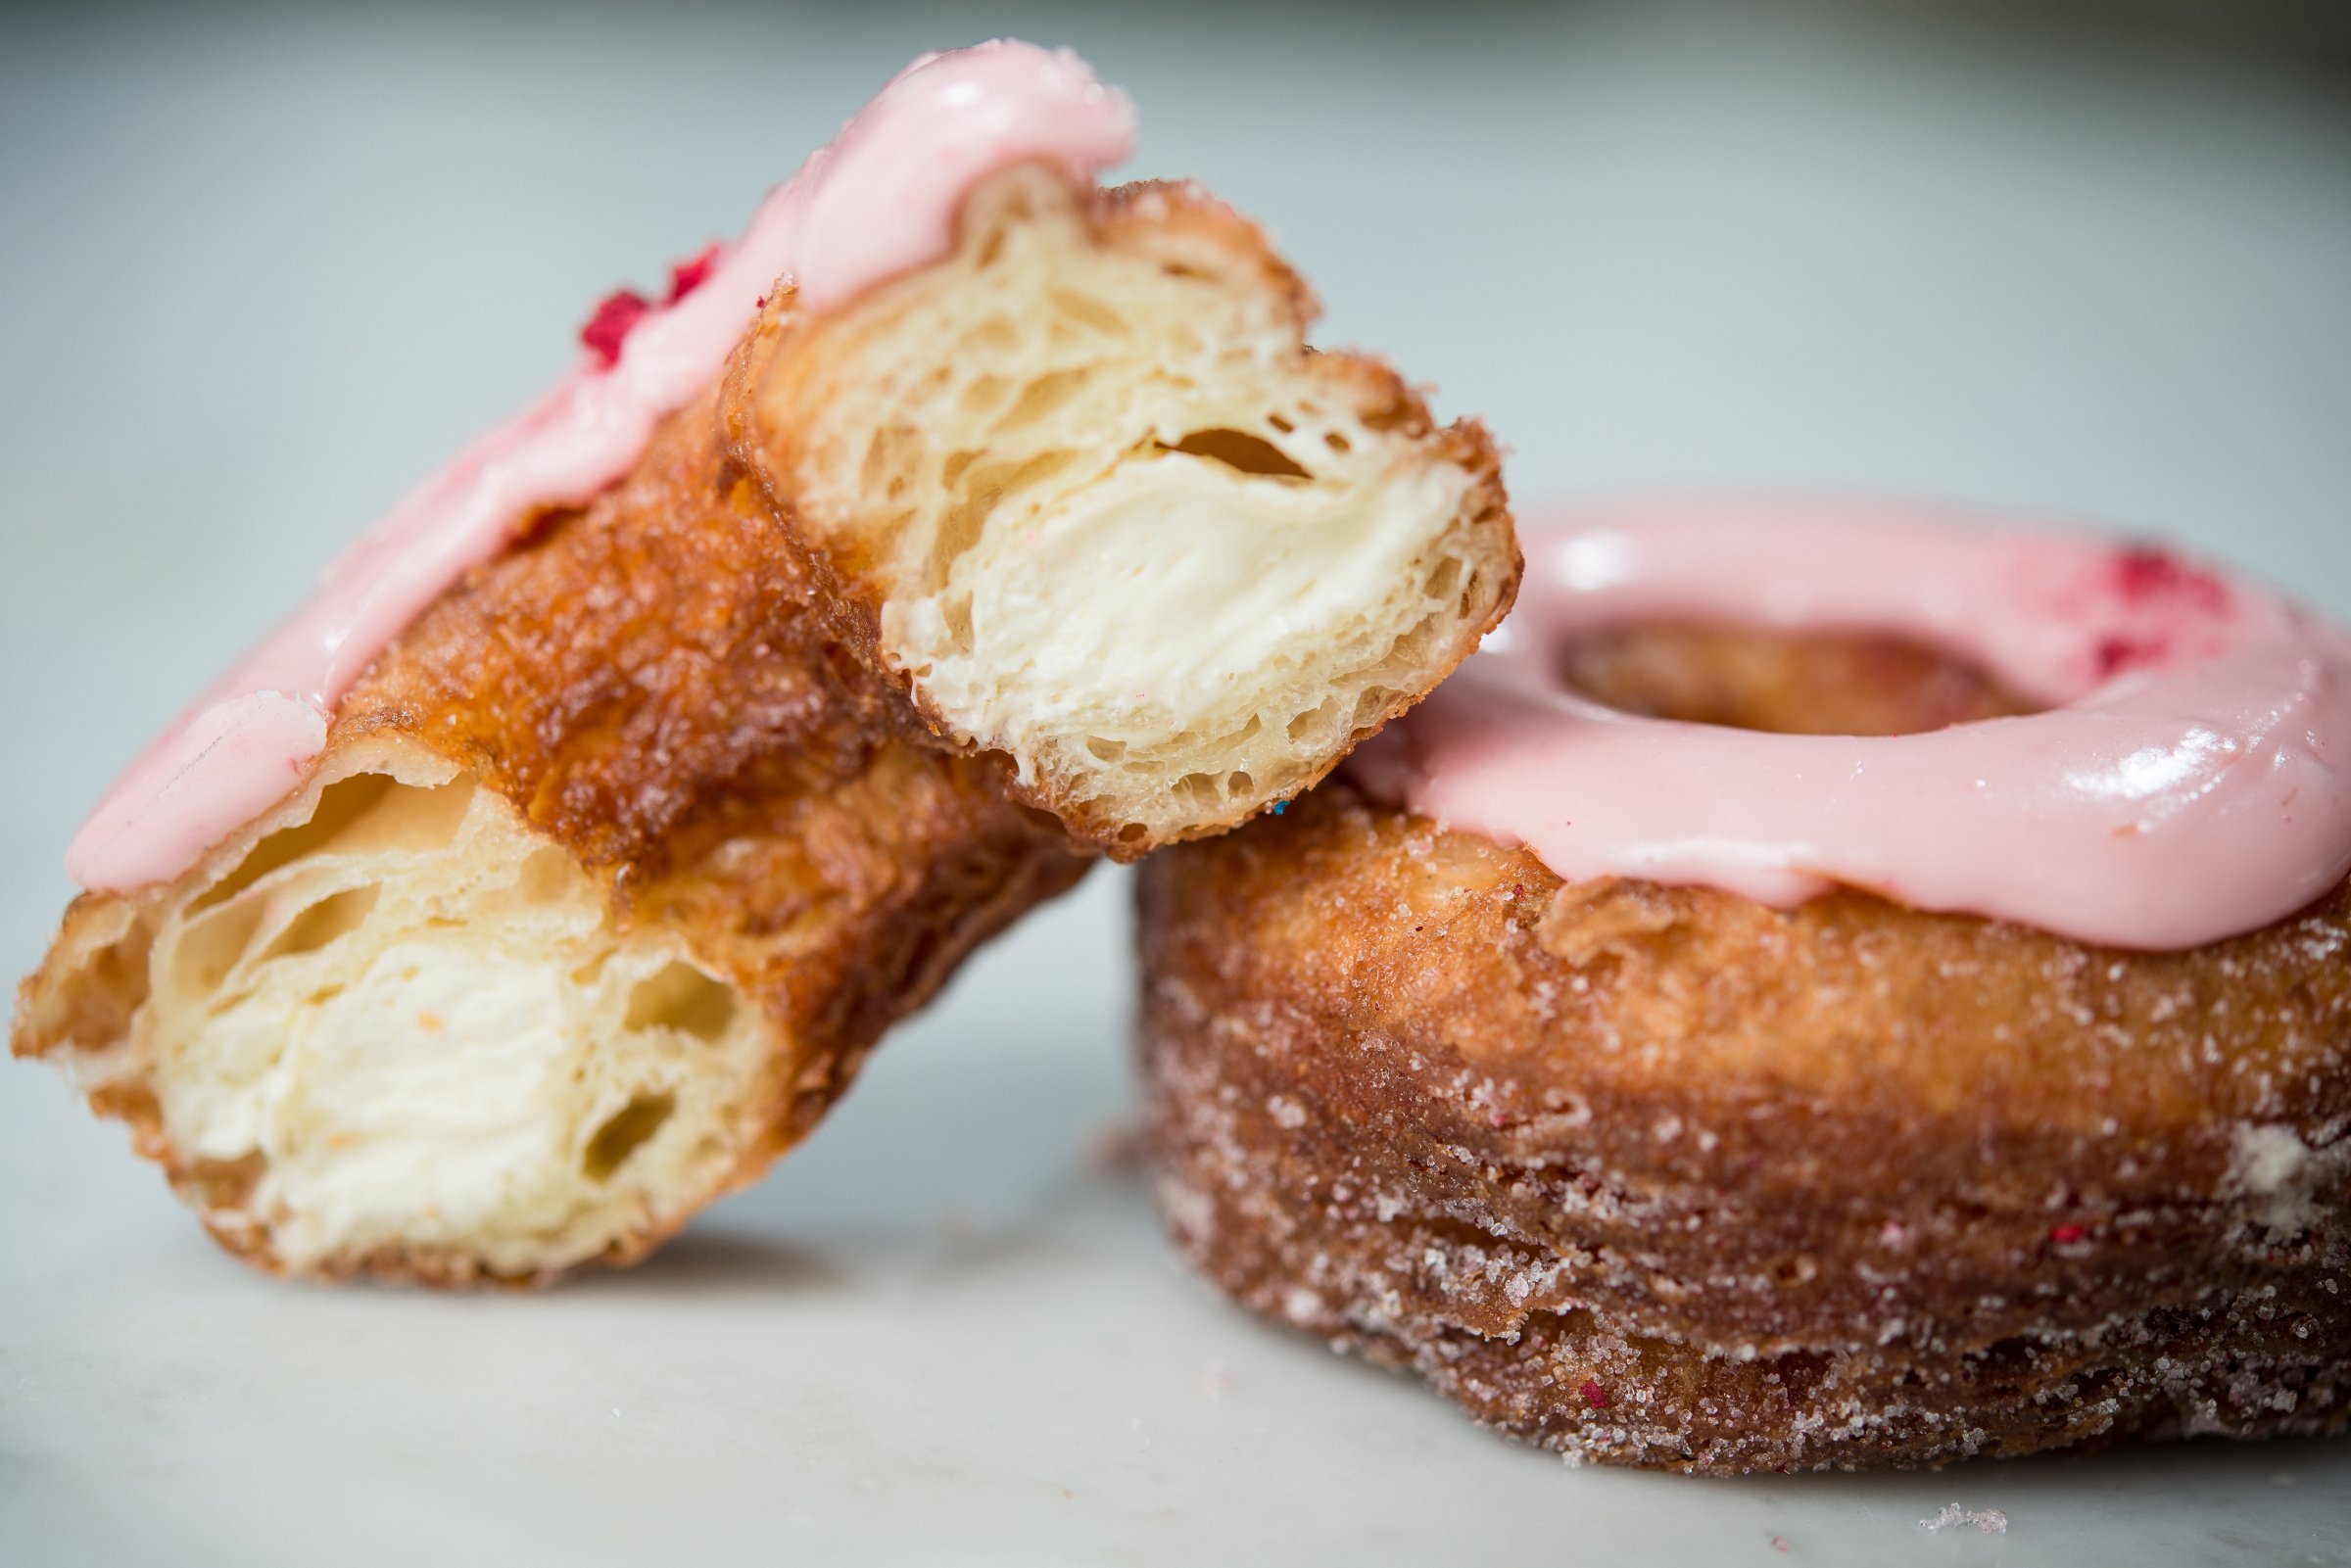 Crazy for Cronuts?